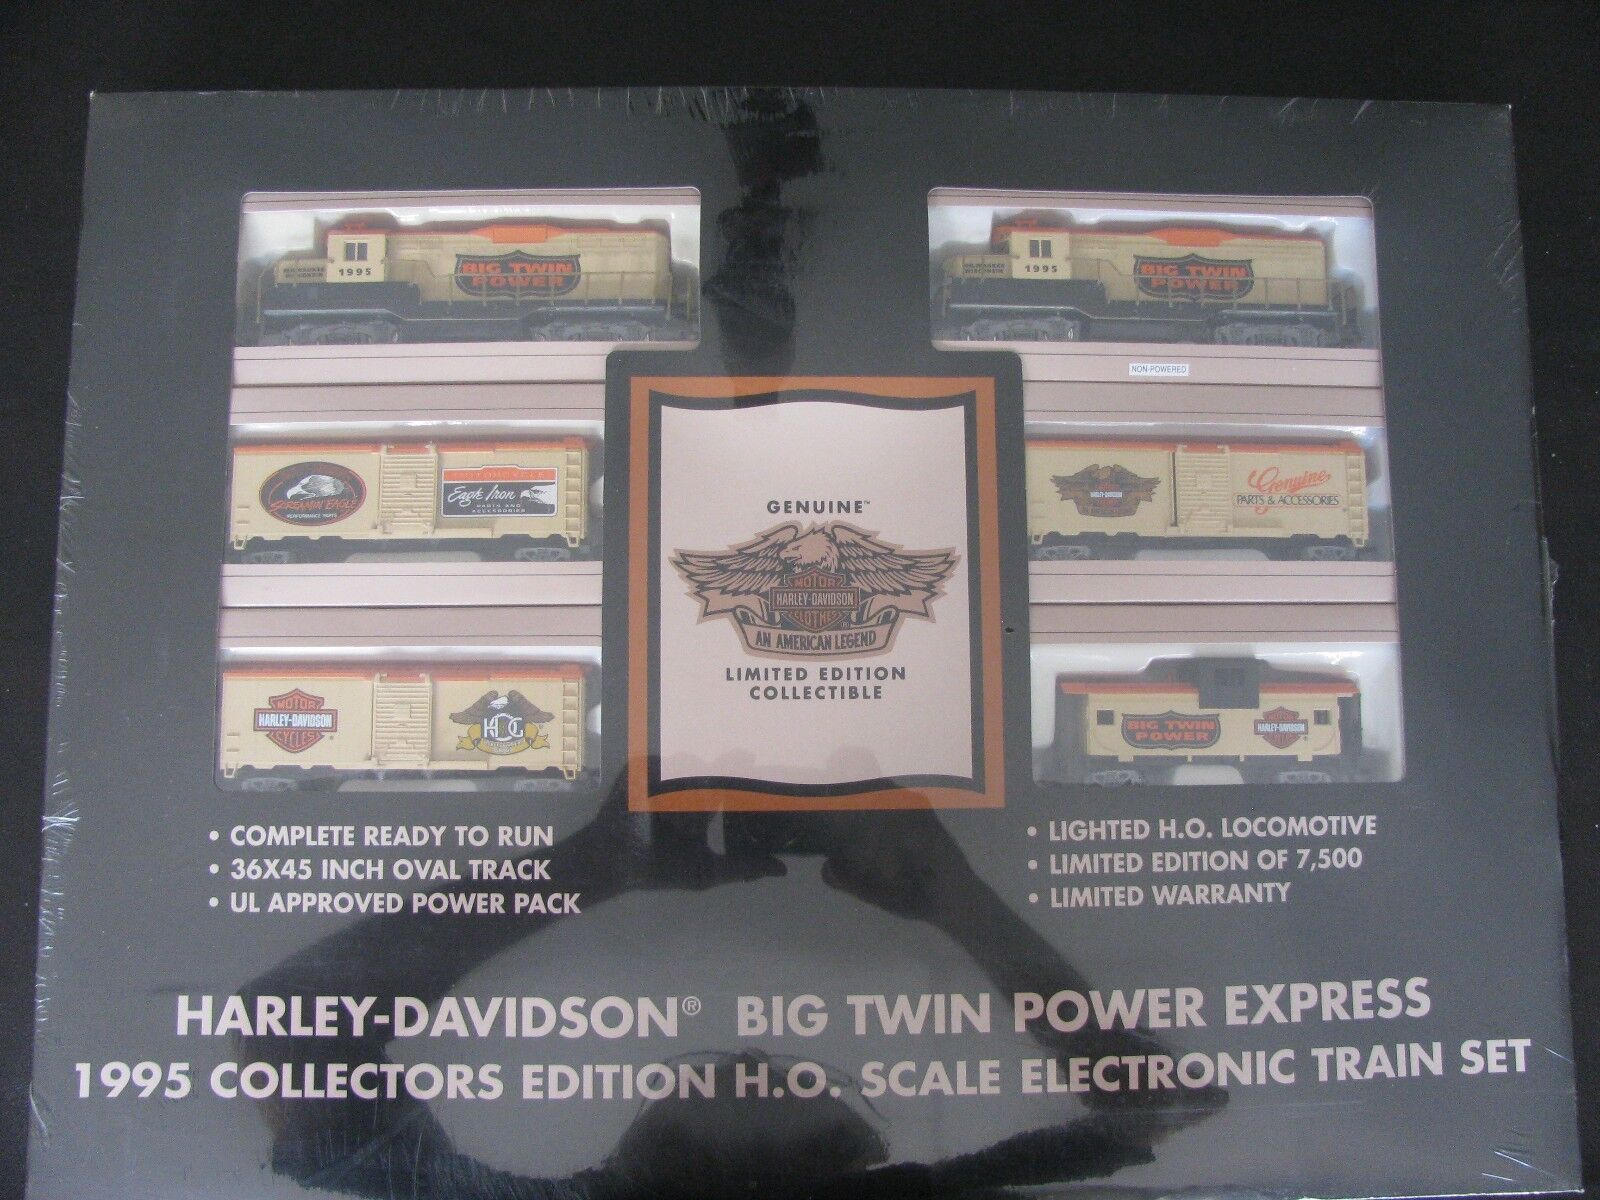 Harley-Davidson HD Big Twin Power 1995 Collector Edition HO Scale Electric Train